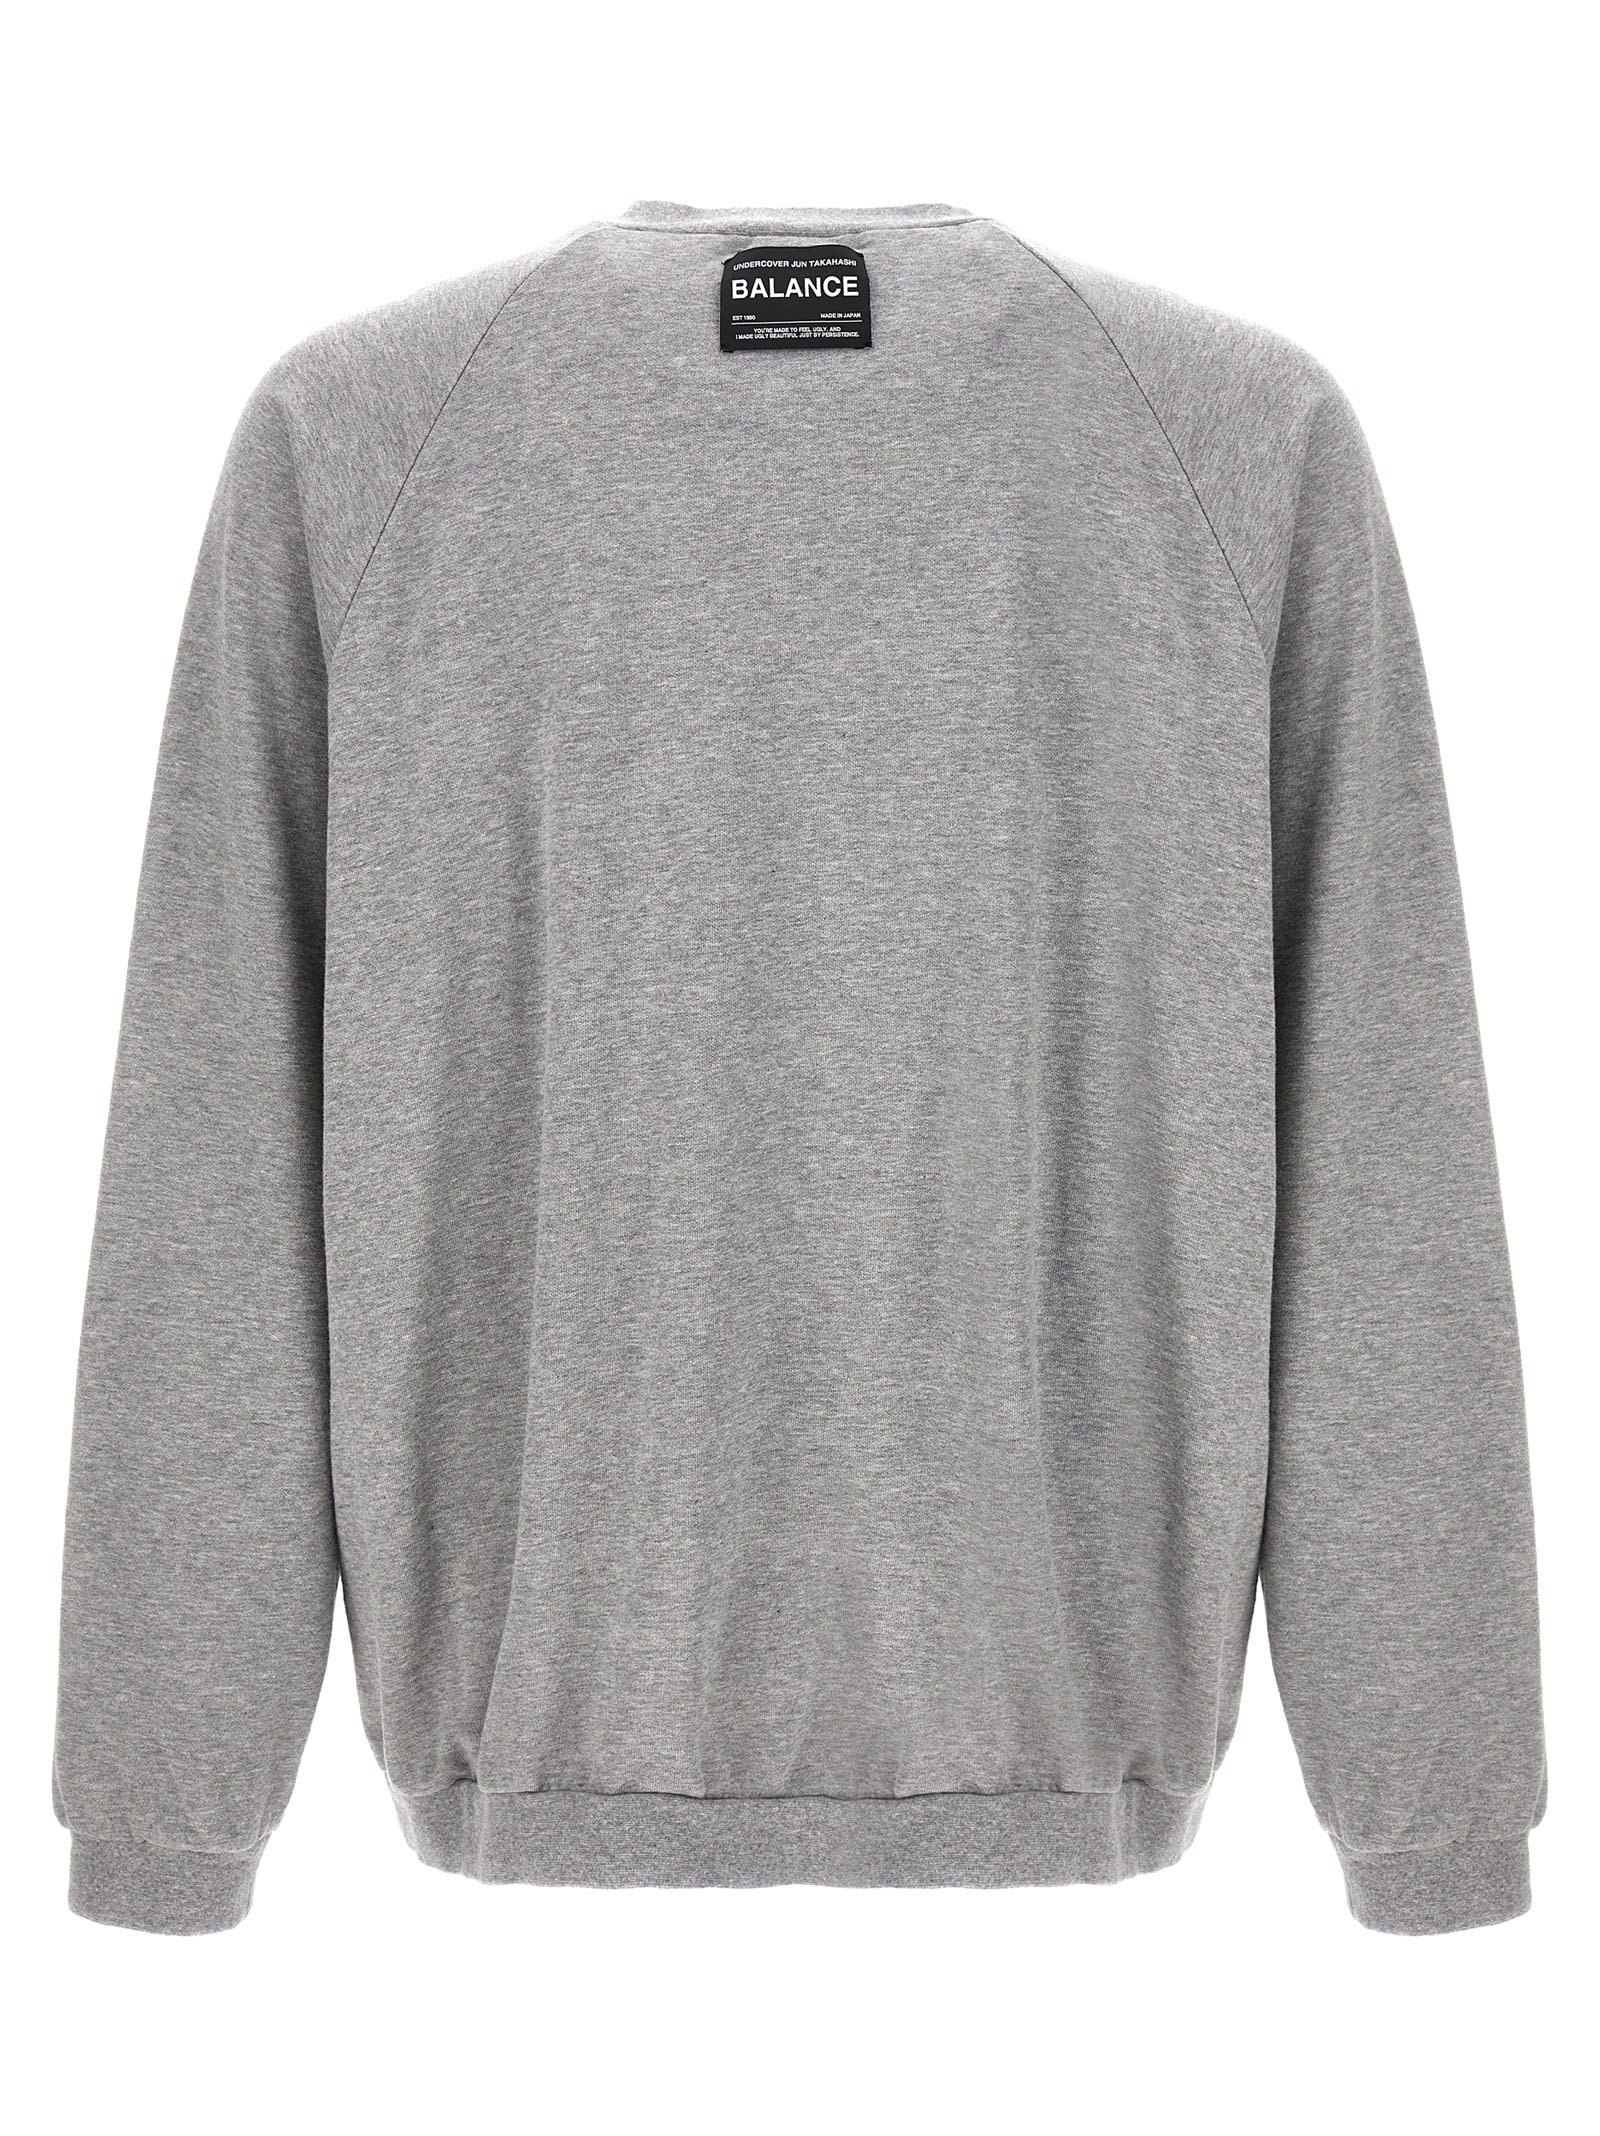 Shop Undercover Chaos And Balance Sweatshirt In Gray